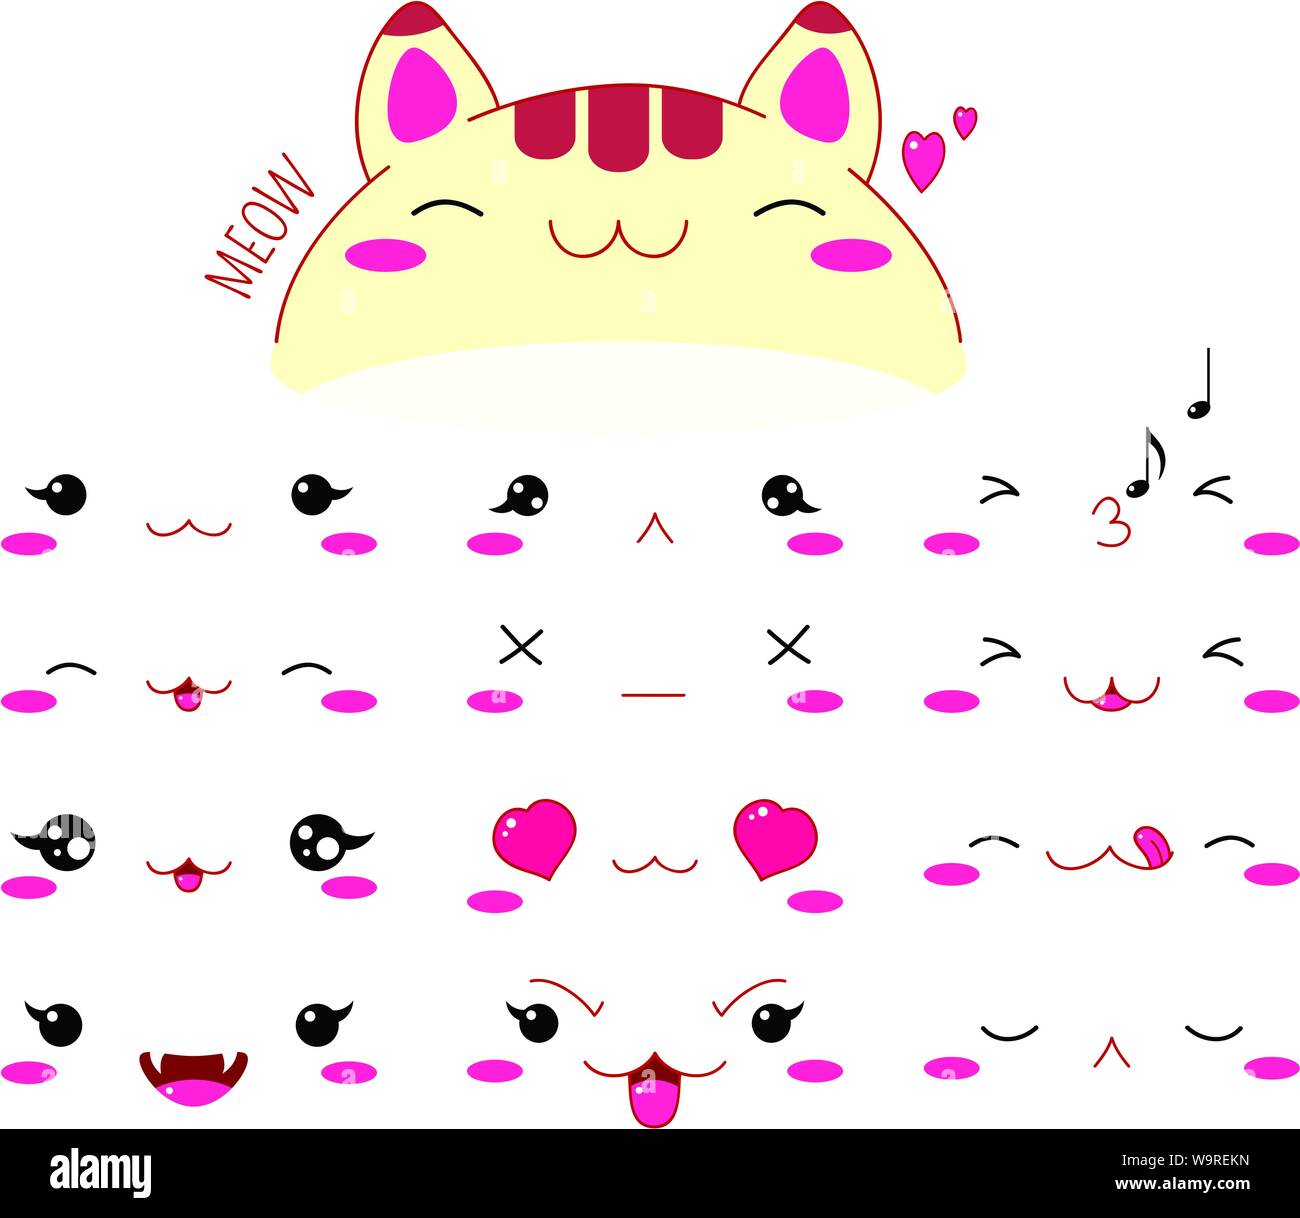 Cute funny cats set various emotions. Kawaii style emoticon icon set with pink cheeks and winking eyes. EPS8 Stock Vector